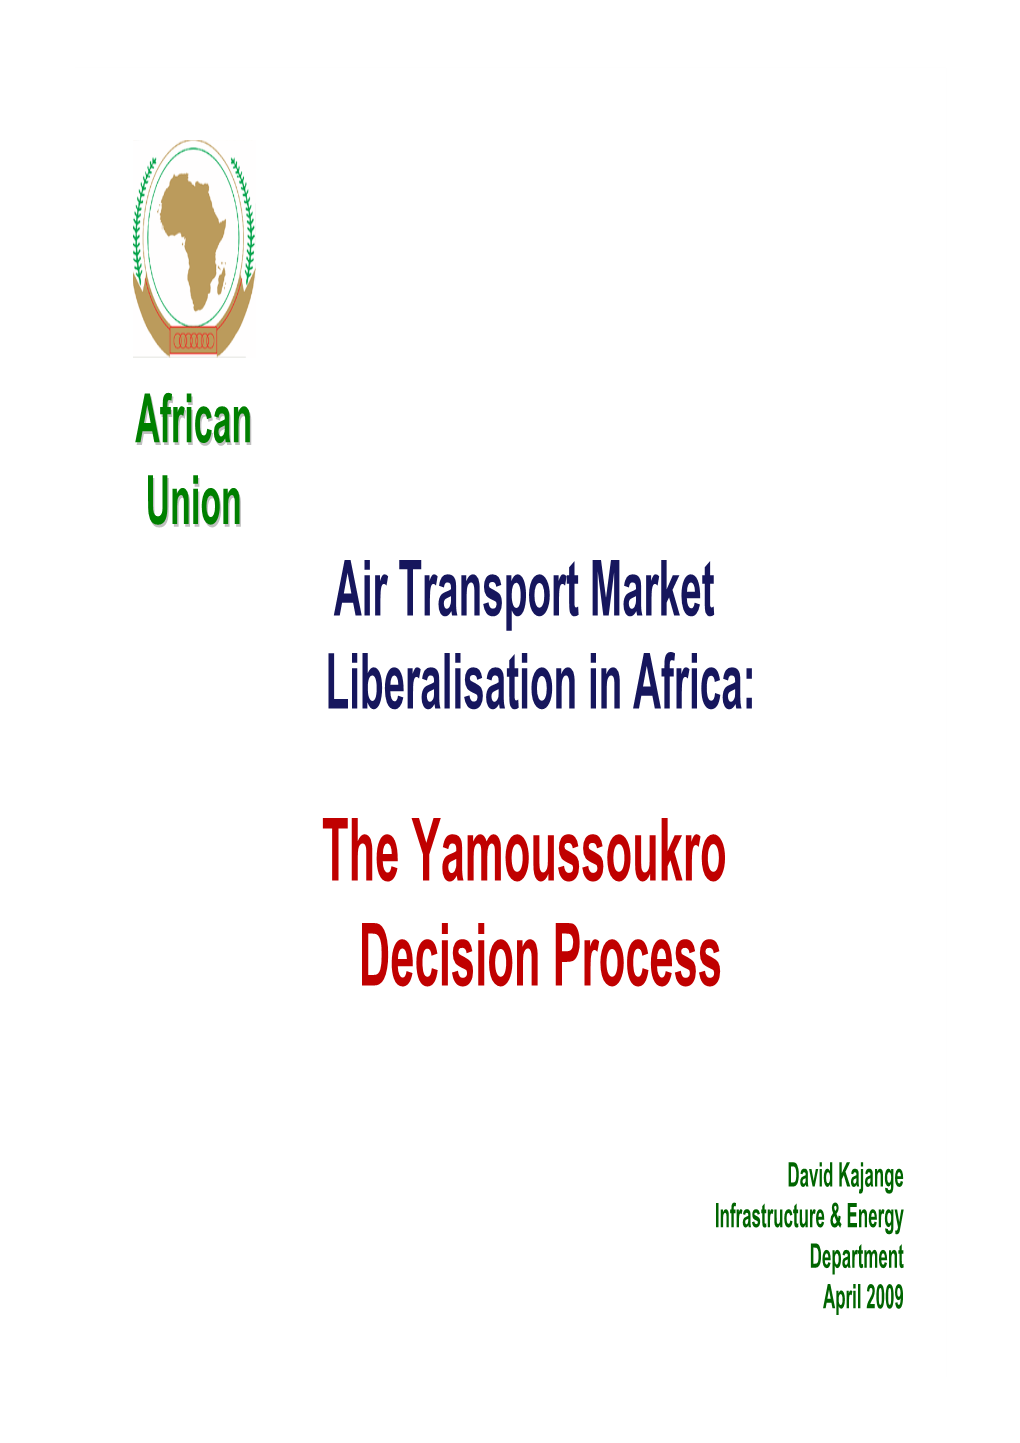 Air Transport Market Liberalisation in Africa: the Yamoussoukro Decision Process